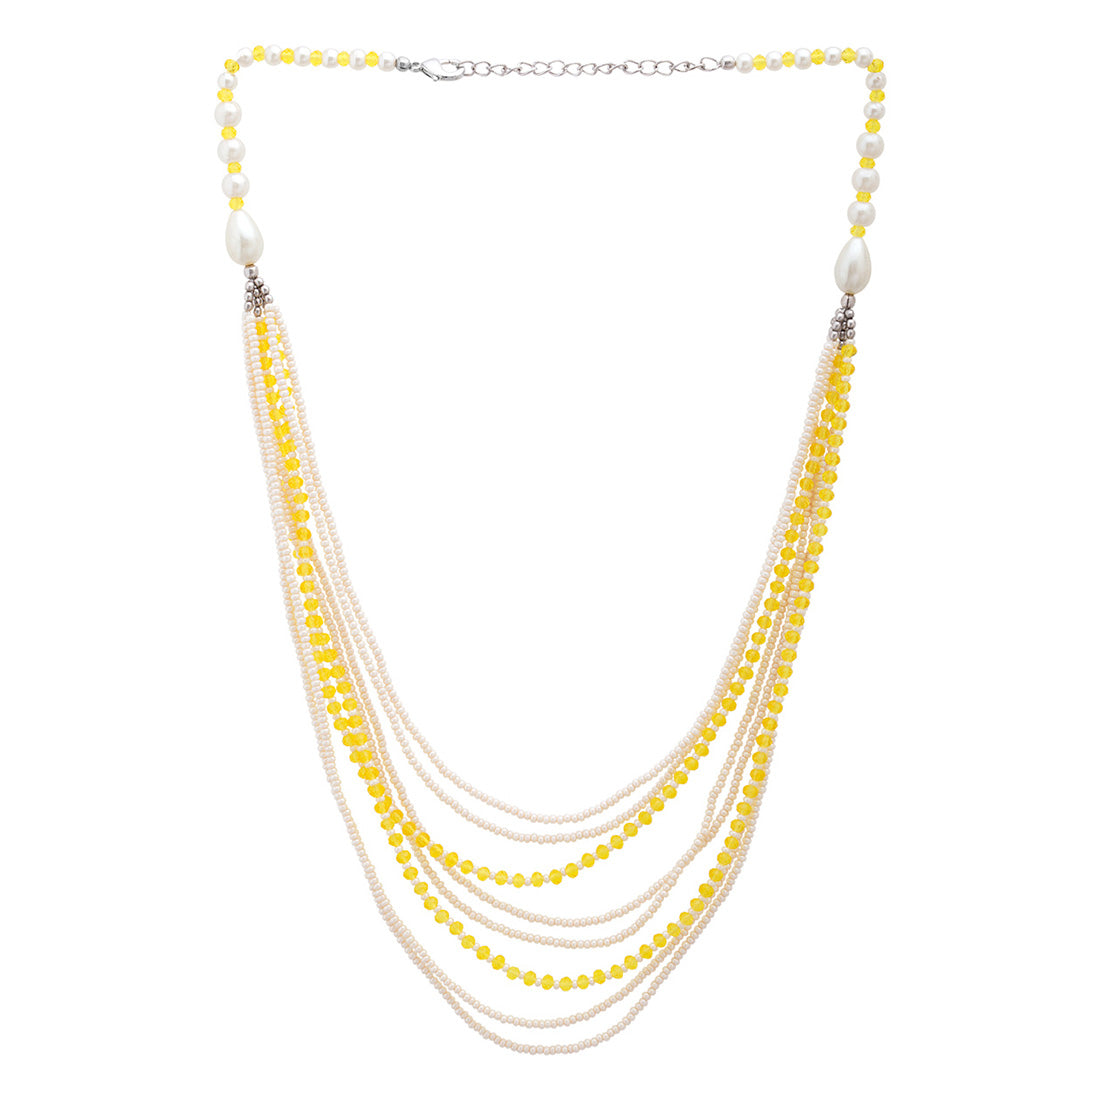 Multi Layer Pearl and Yellow Beads Necklace